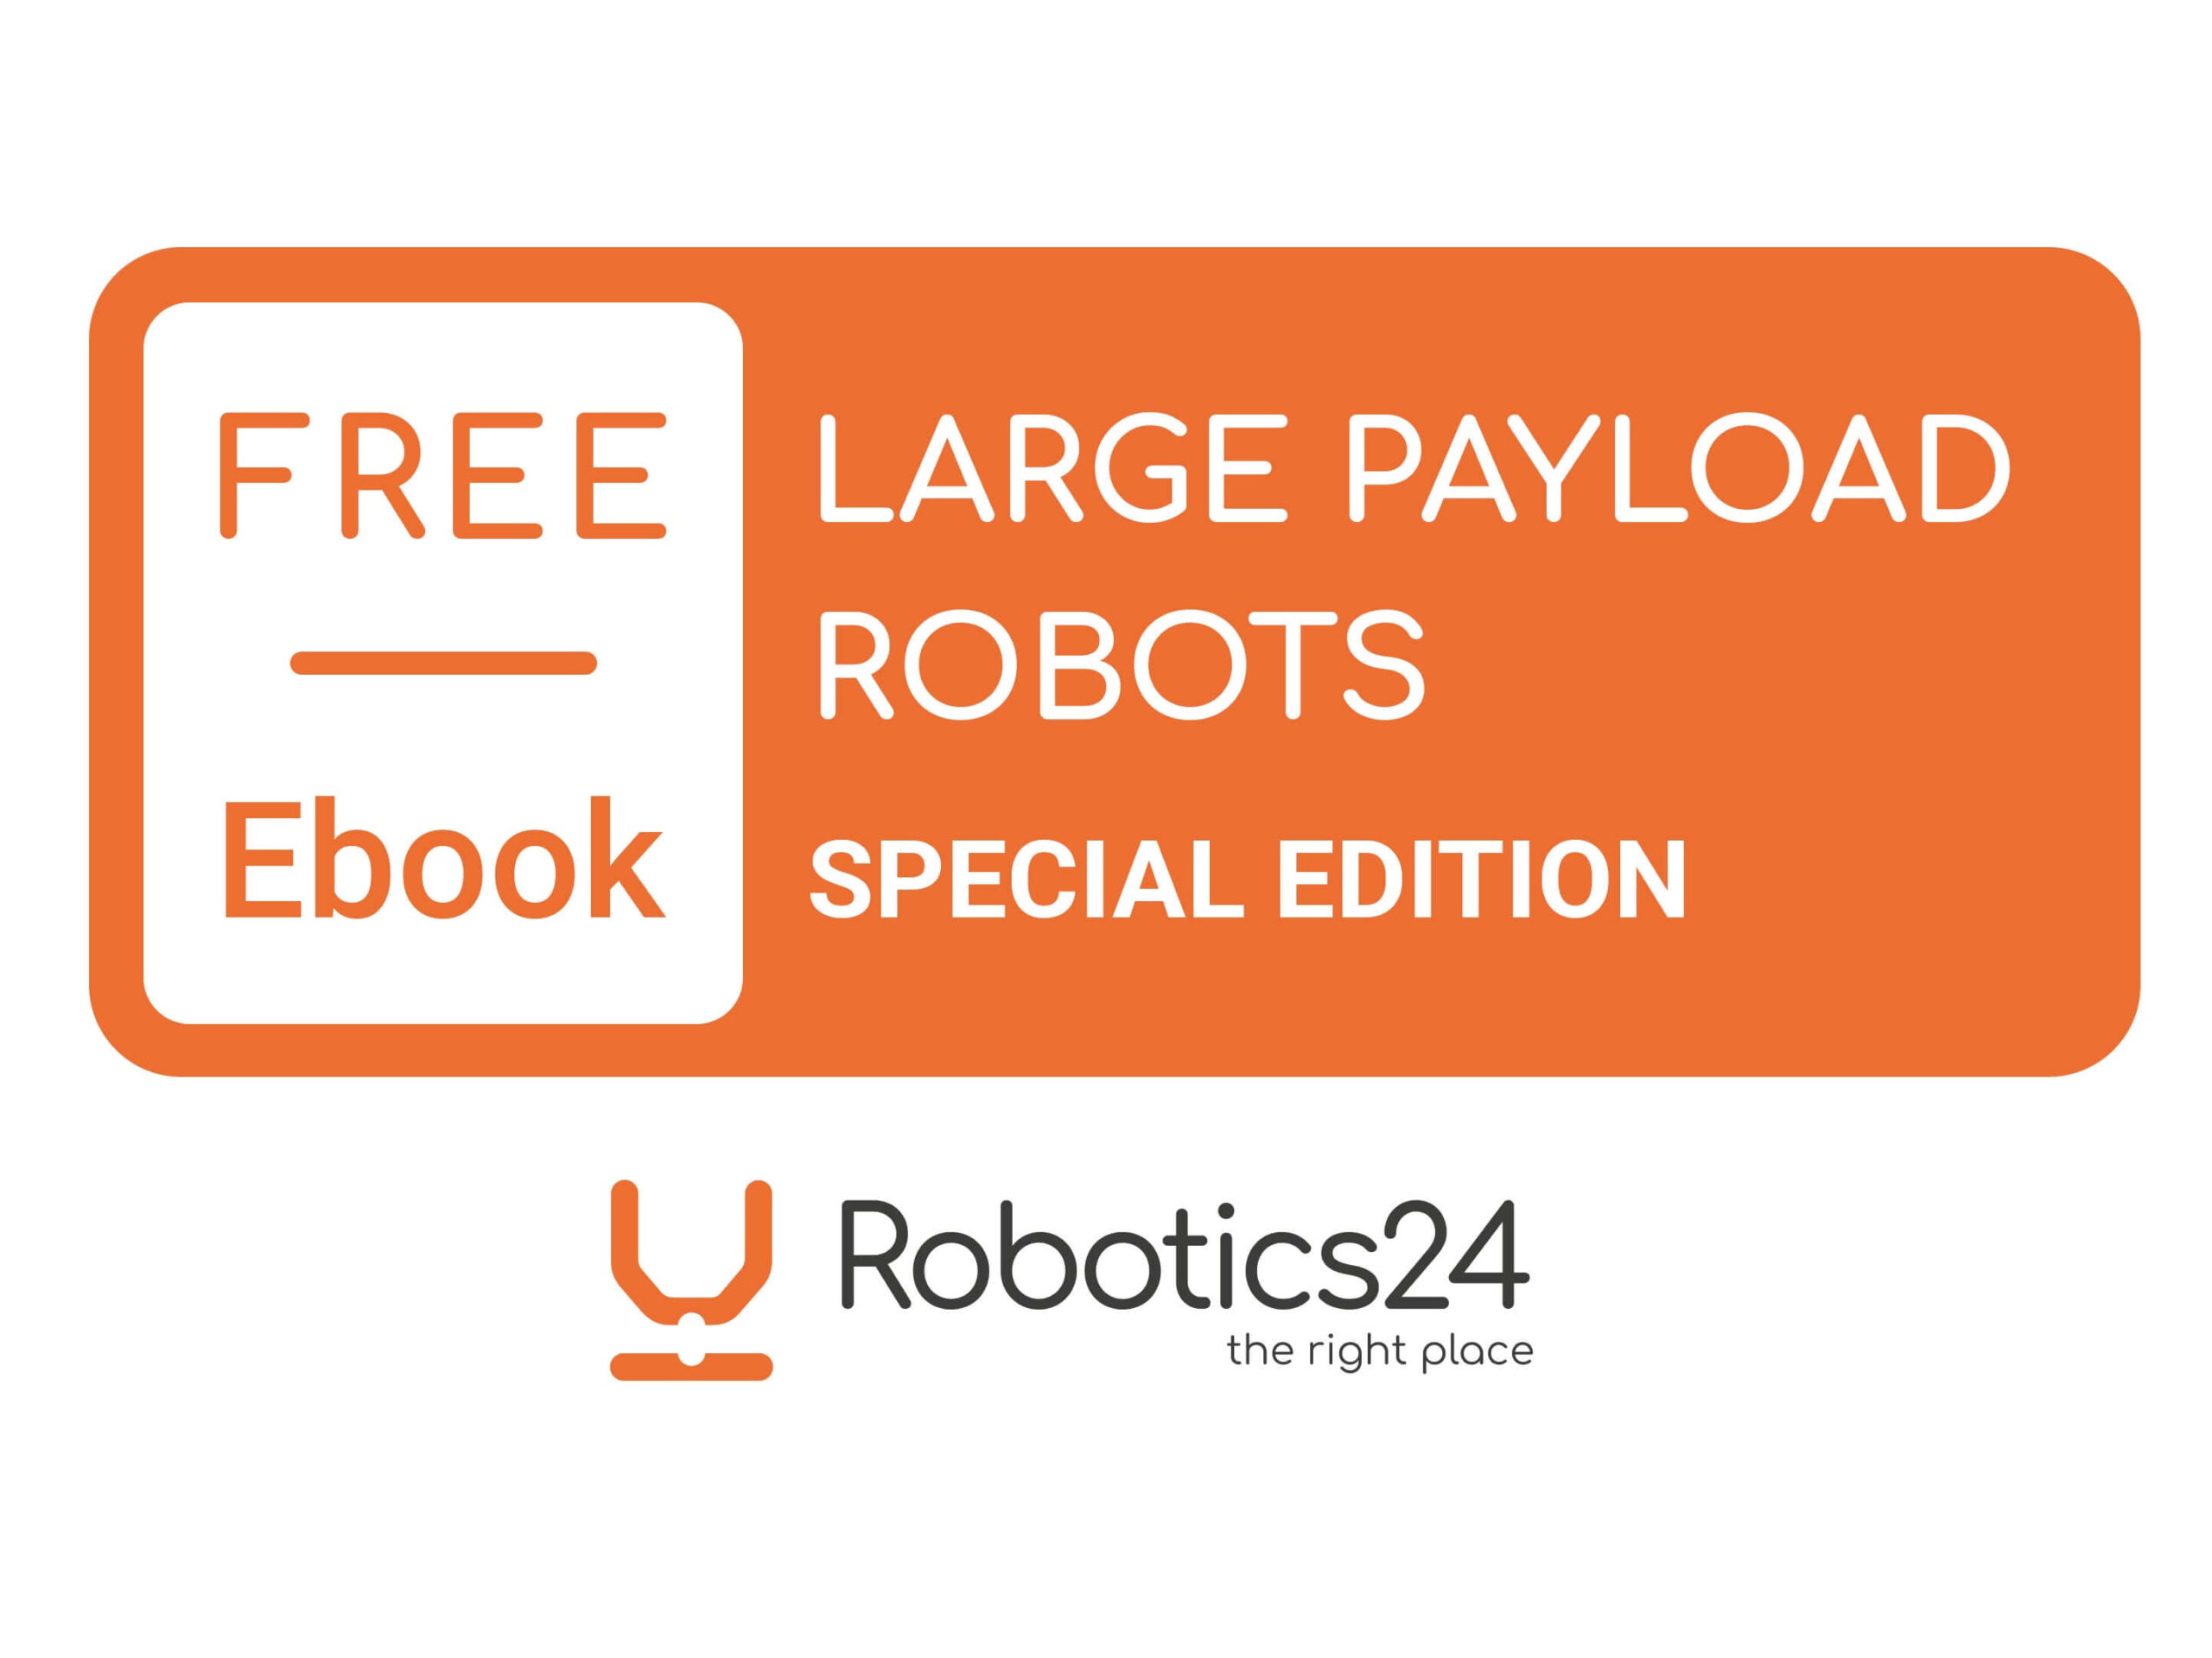 Specials Large Payload Robots